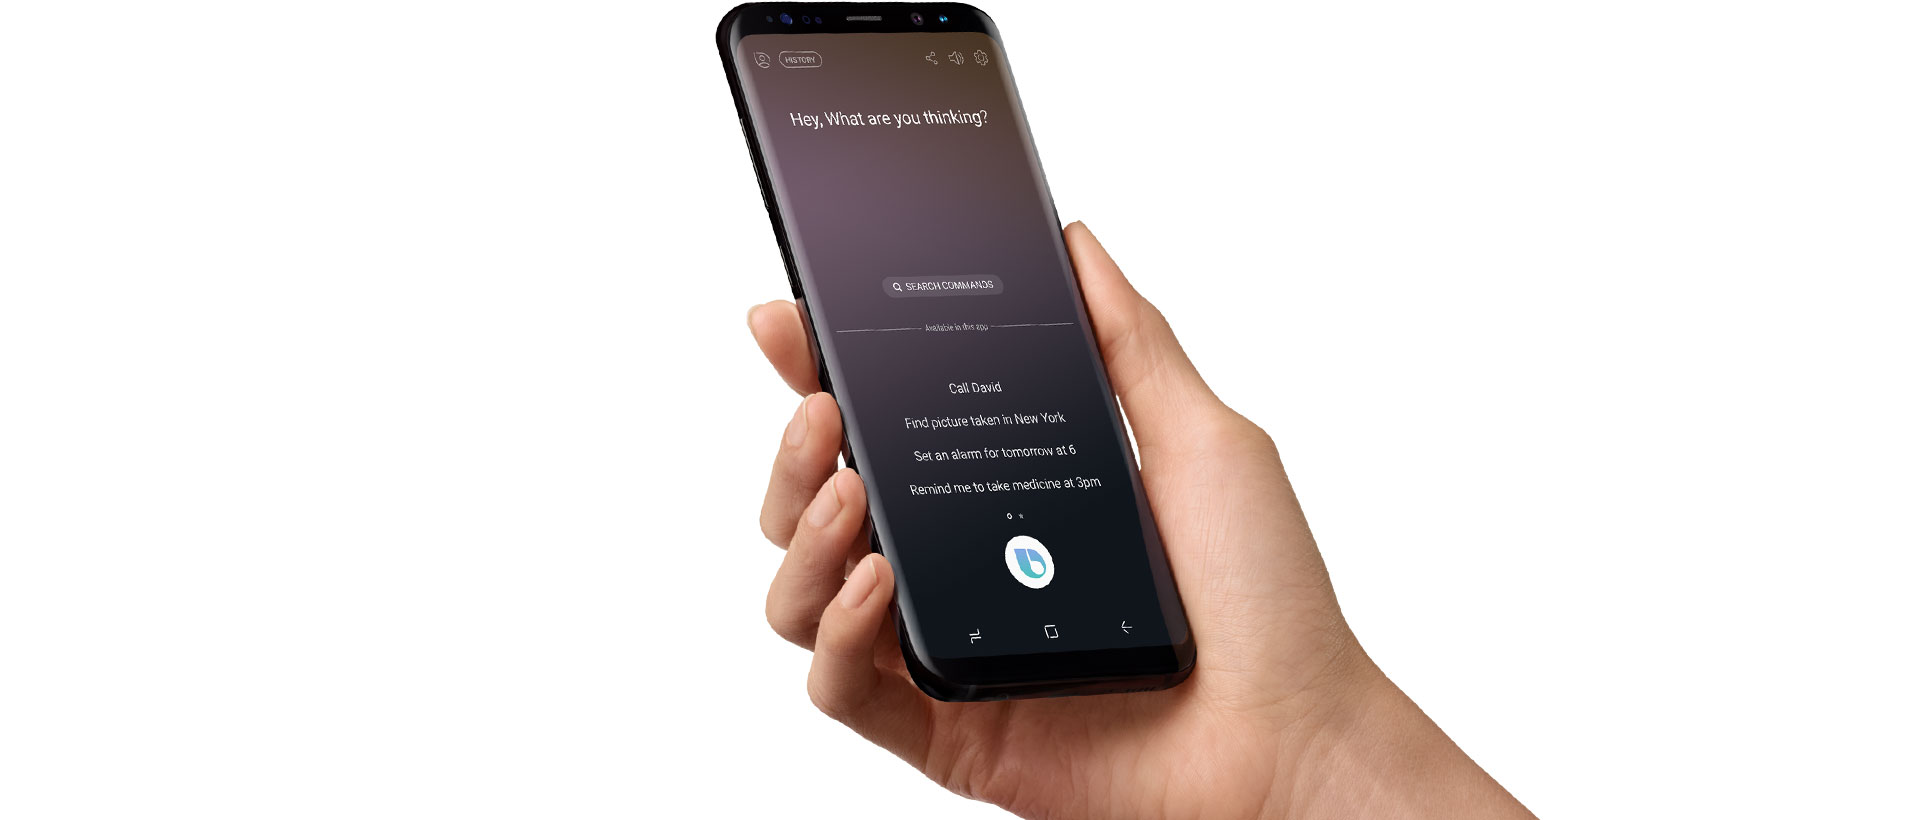 samsung bixby 2.0 to launch next year, will be ubiquitous on all samsung devices